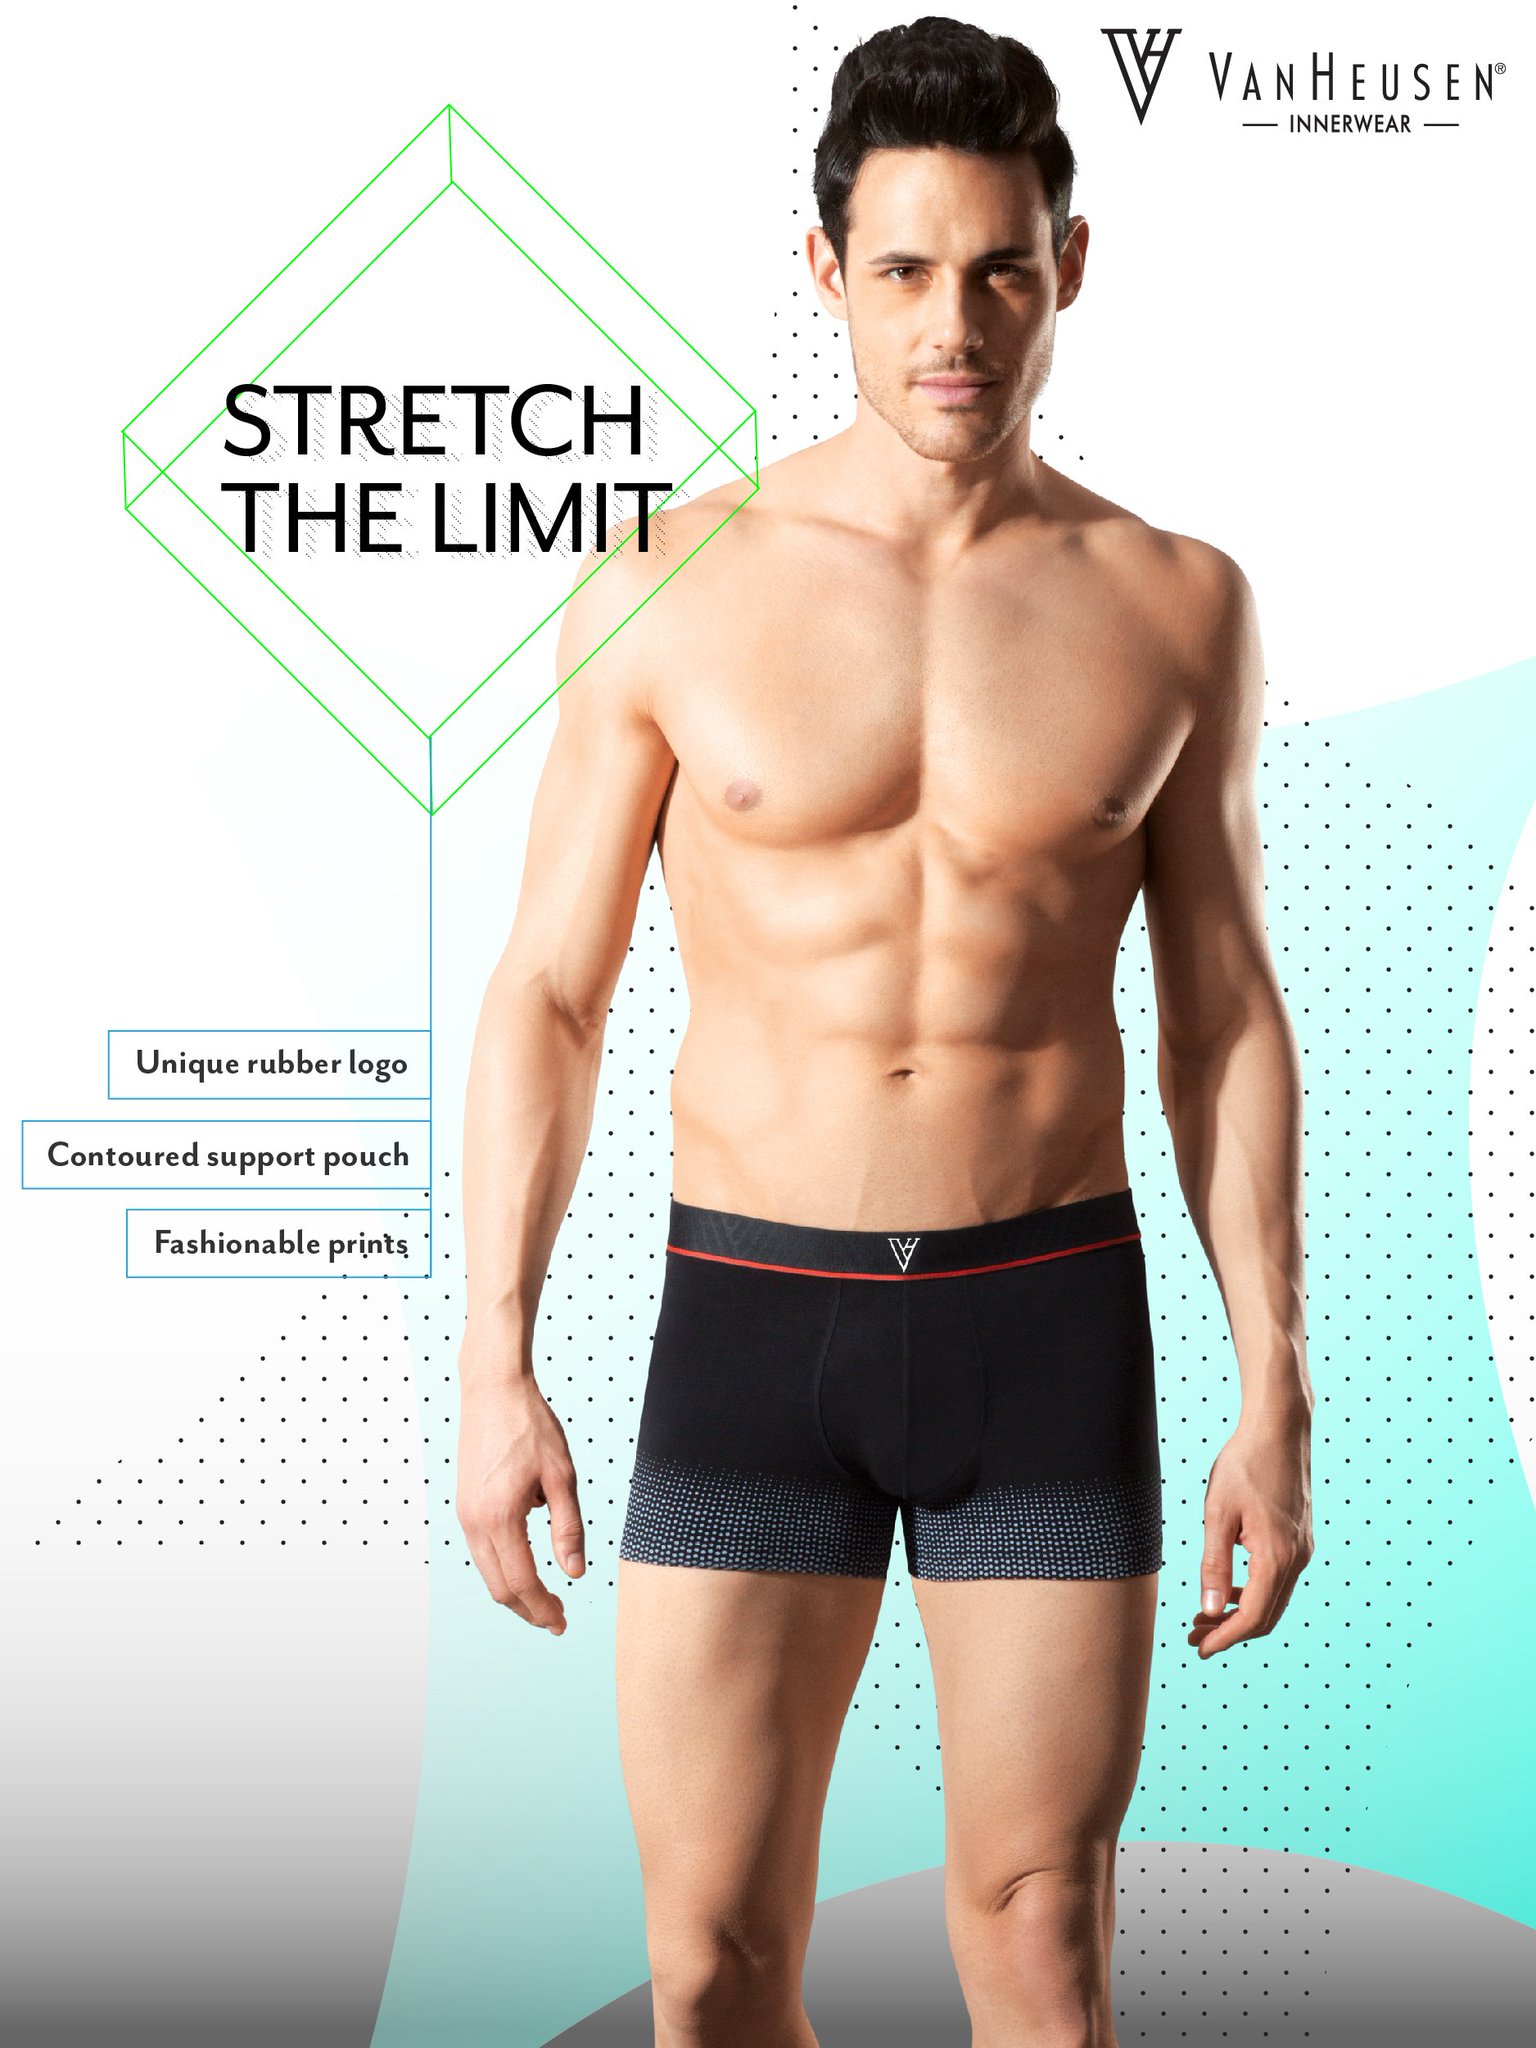 Van Heusen Innerwear on X: Stretch your limits with fashion